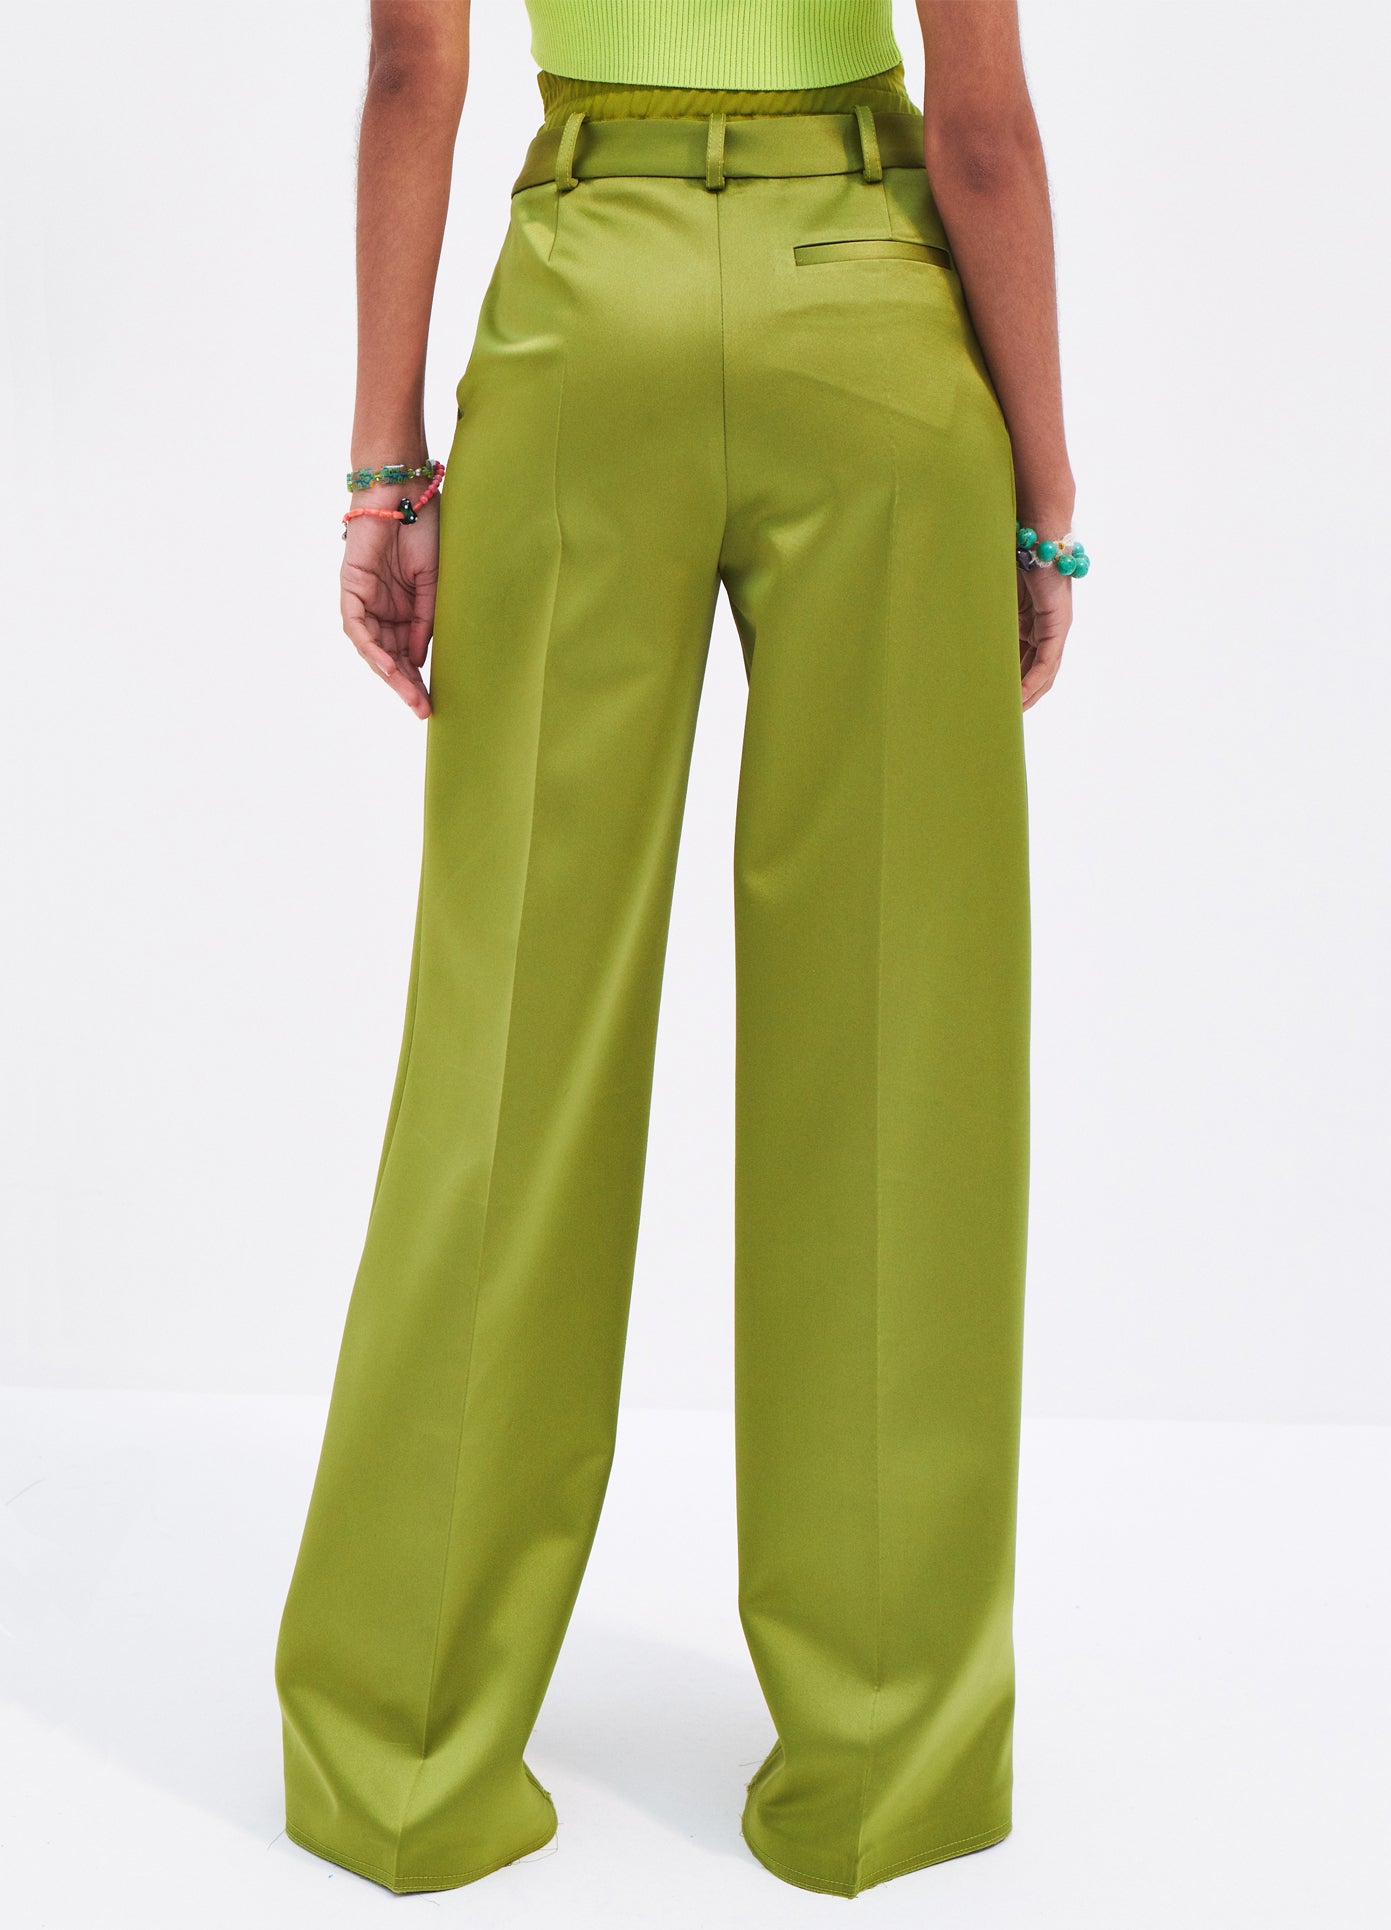 MONSE Satin Double Waistband Wide Leg Trousers in Olive on model back detail view